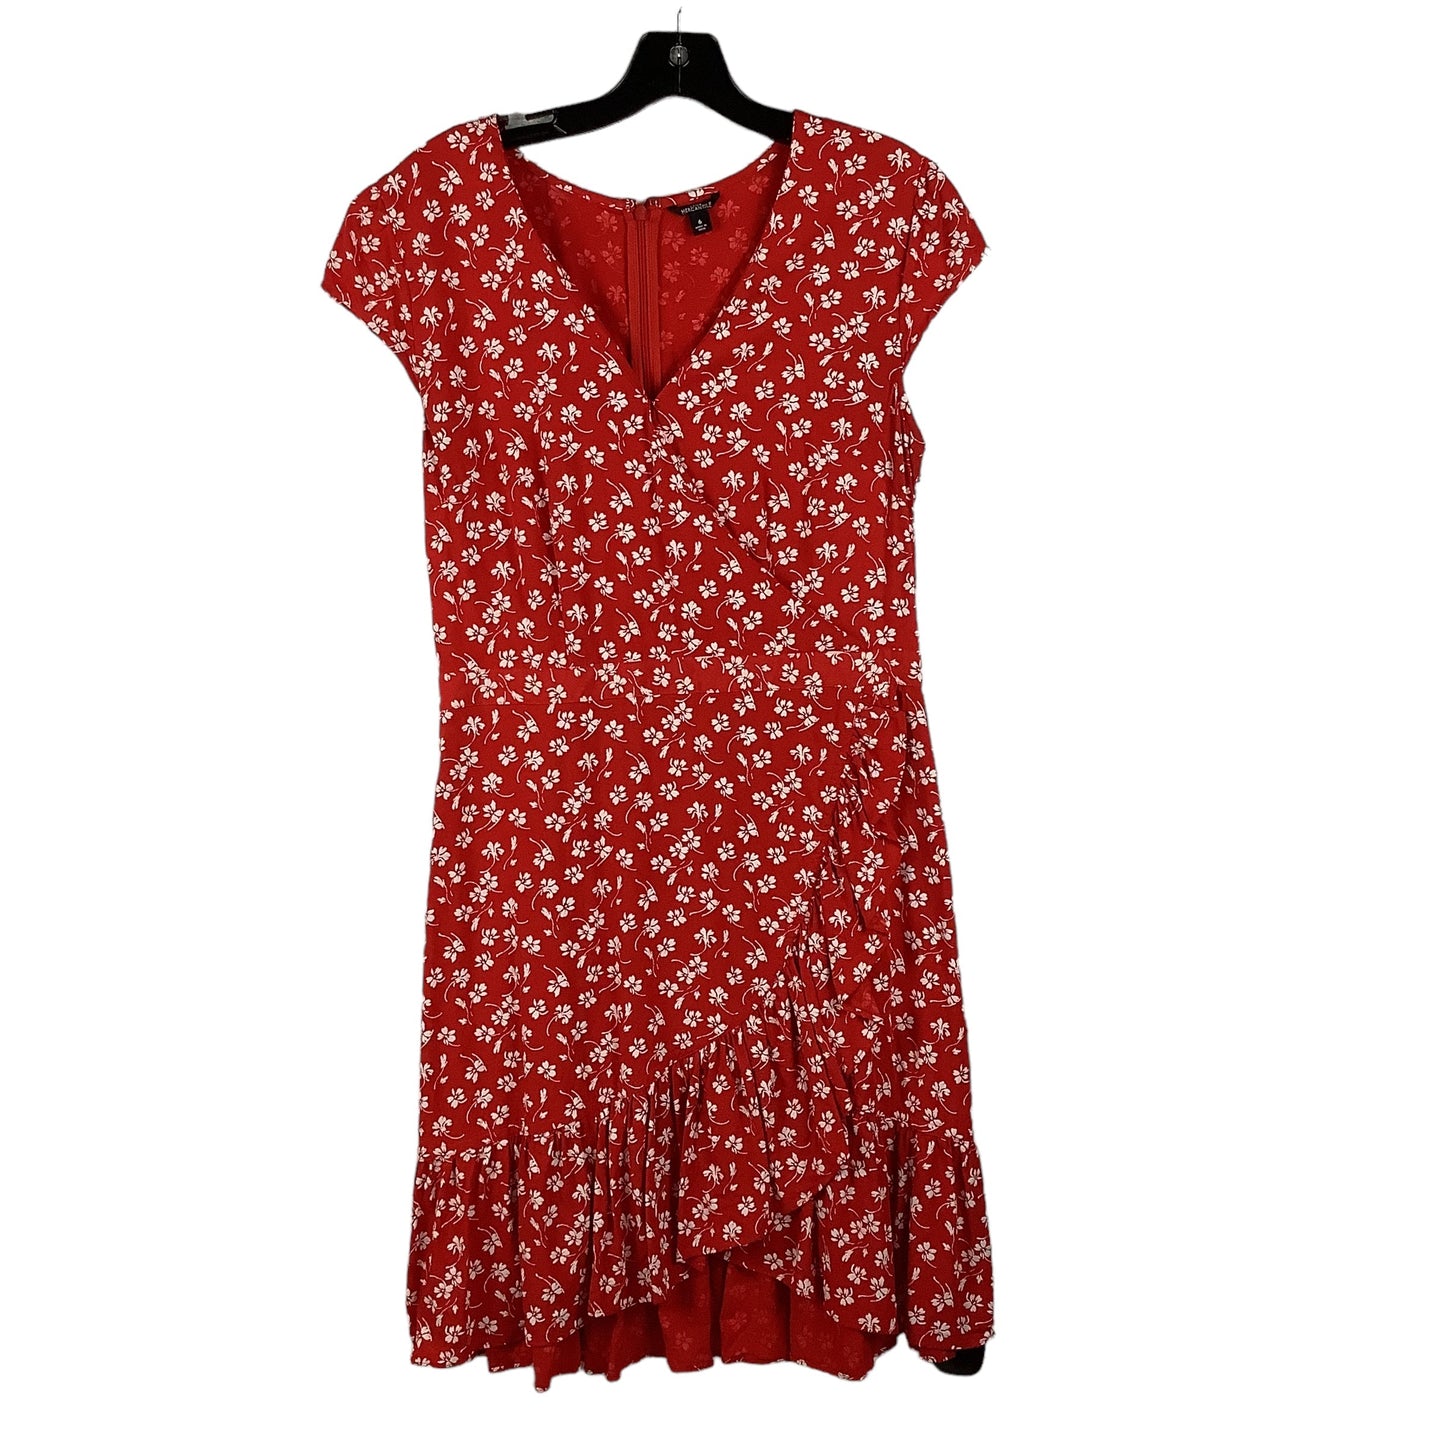 Red Dress Casual Short J. Crew, Size 6